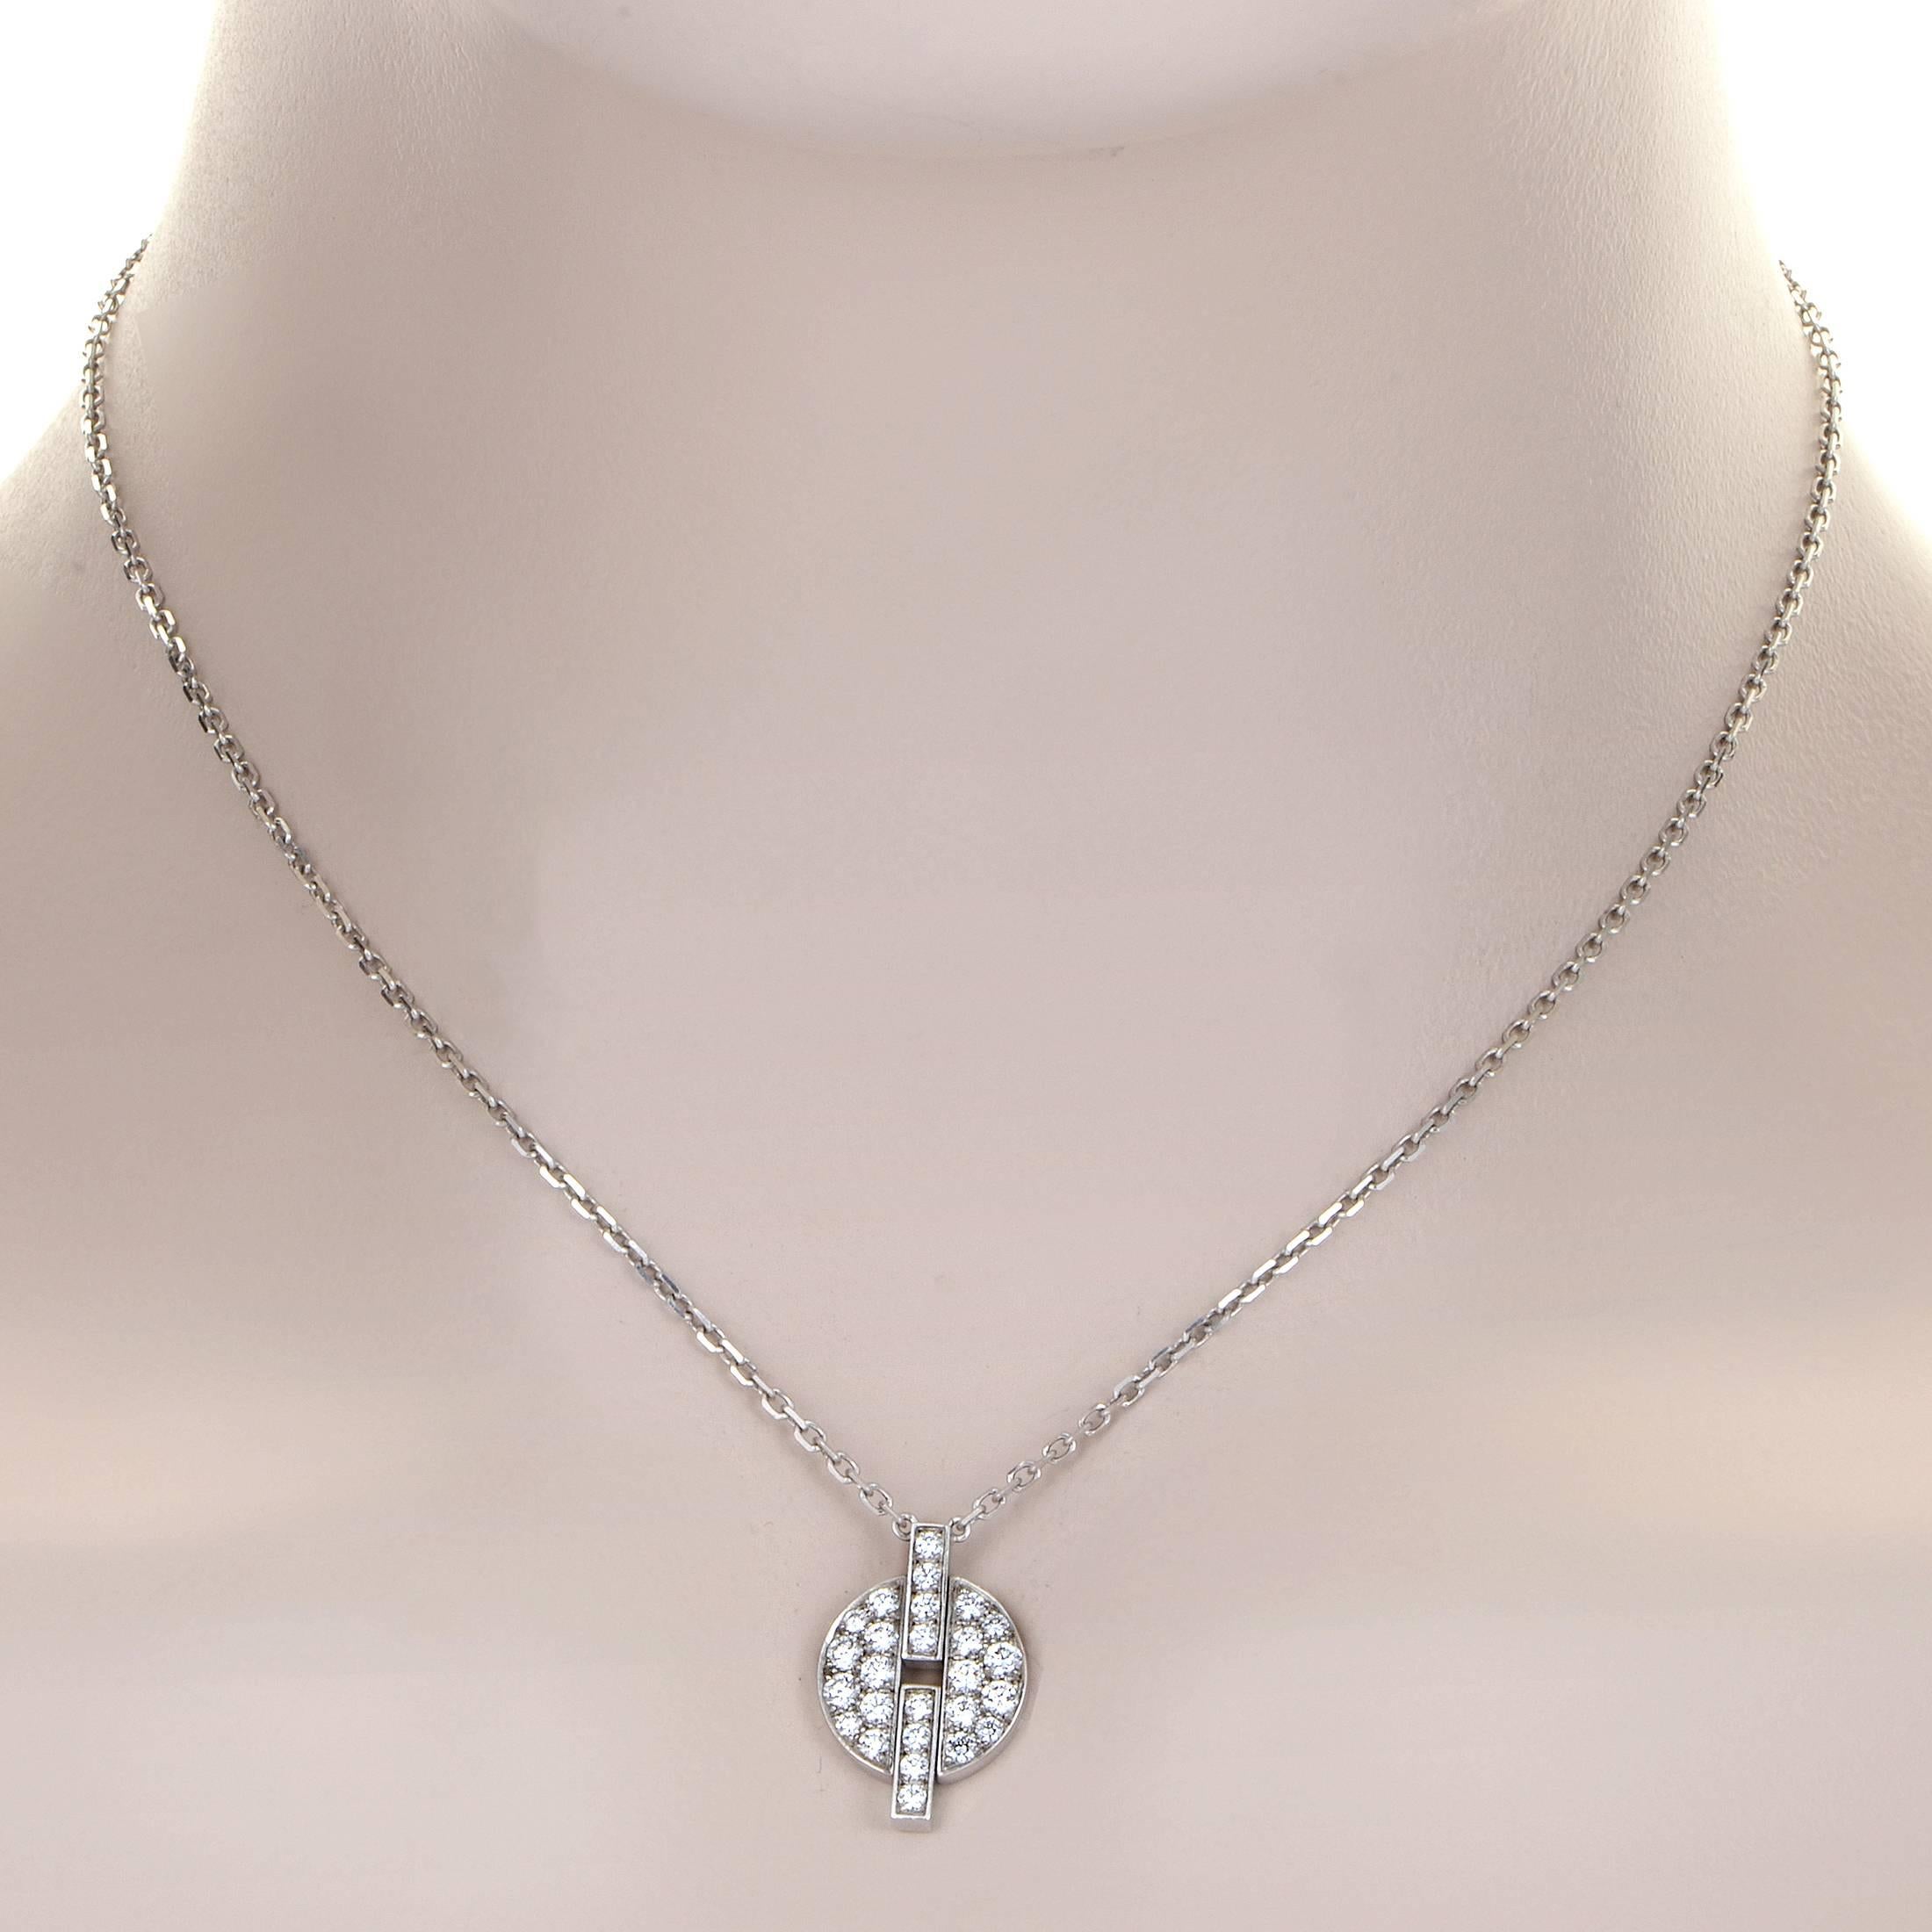 Cartier's Himalia collection is renowned for its gorgeous designs that unite delicate shapes and clean feminine lines. This pendant necklace from the collection is made of 18K white gold and features a pendant set with a lovely diamond pave.
Retail